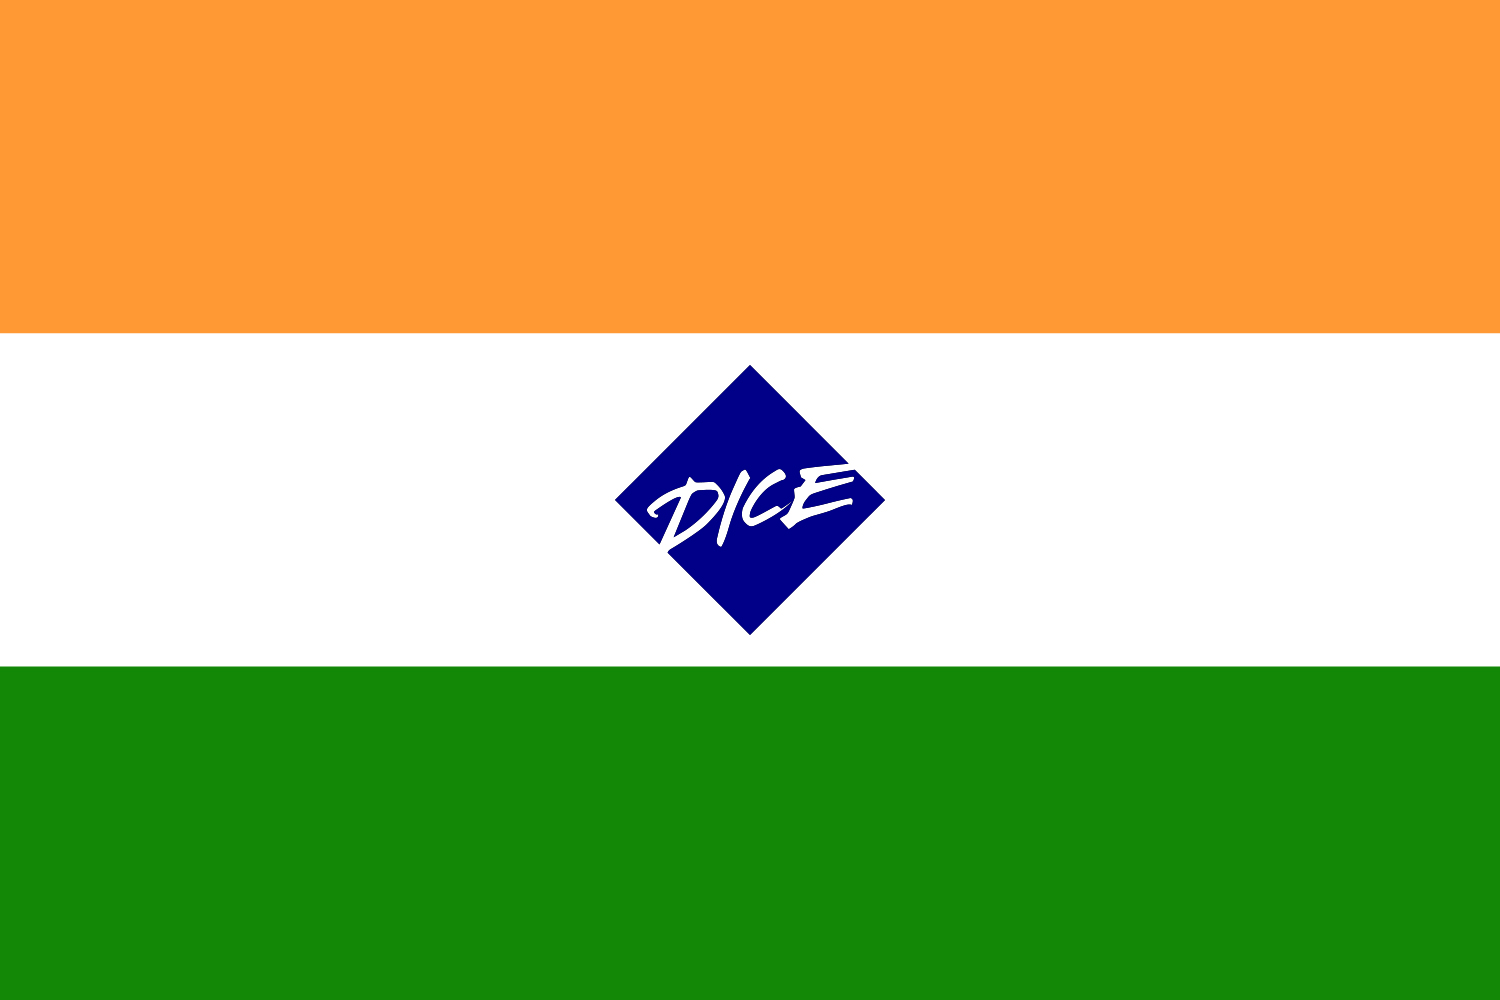 Events and live stream ticketing company DICE launches in India